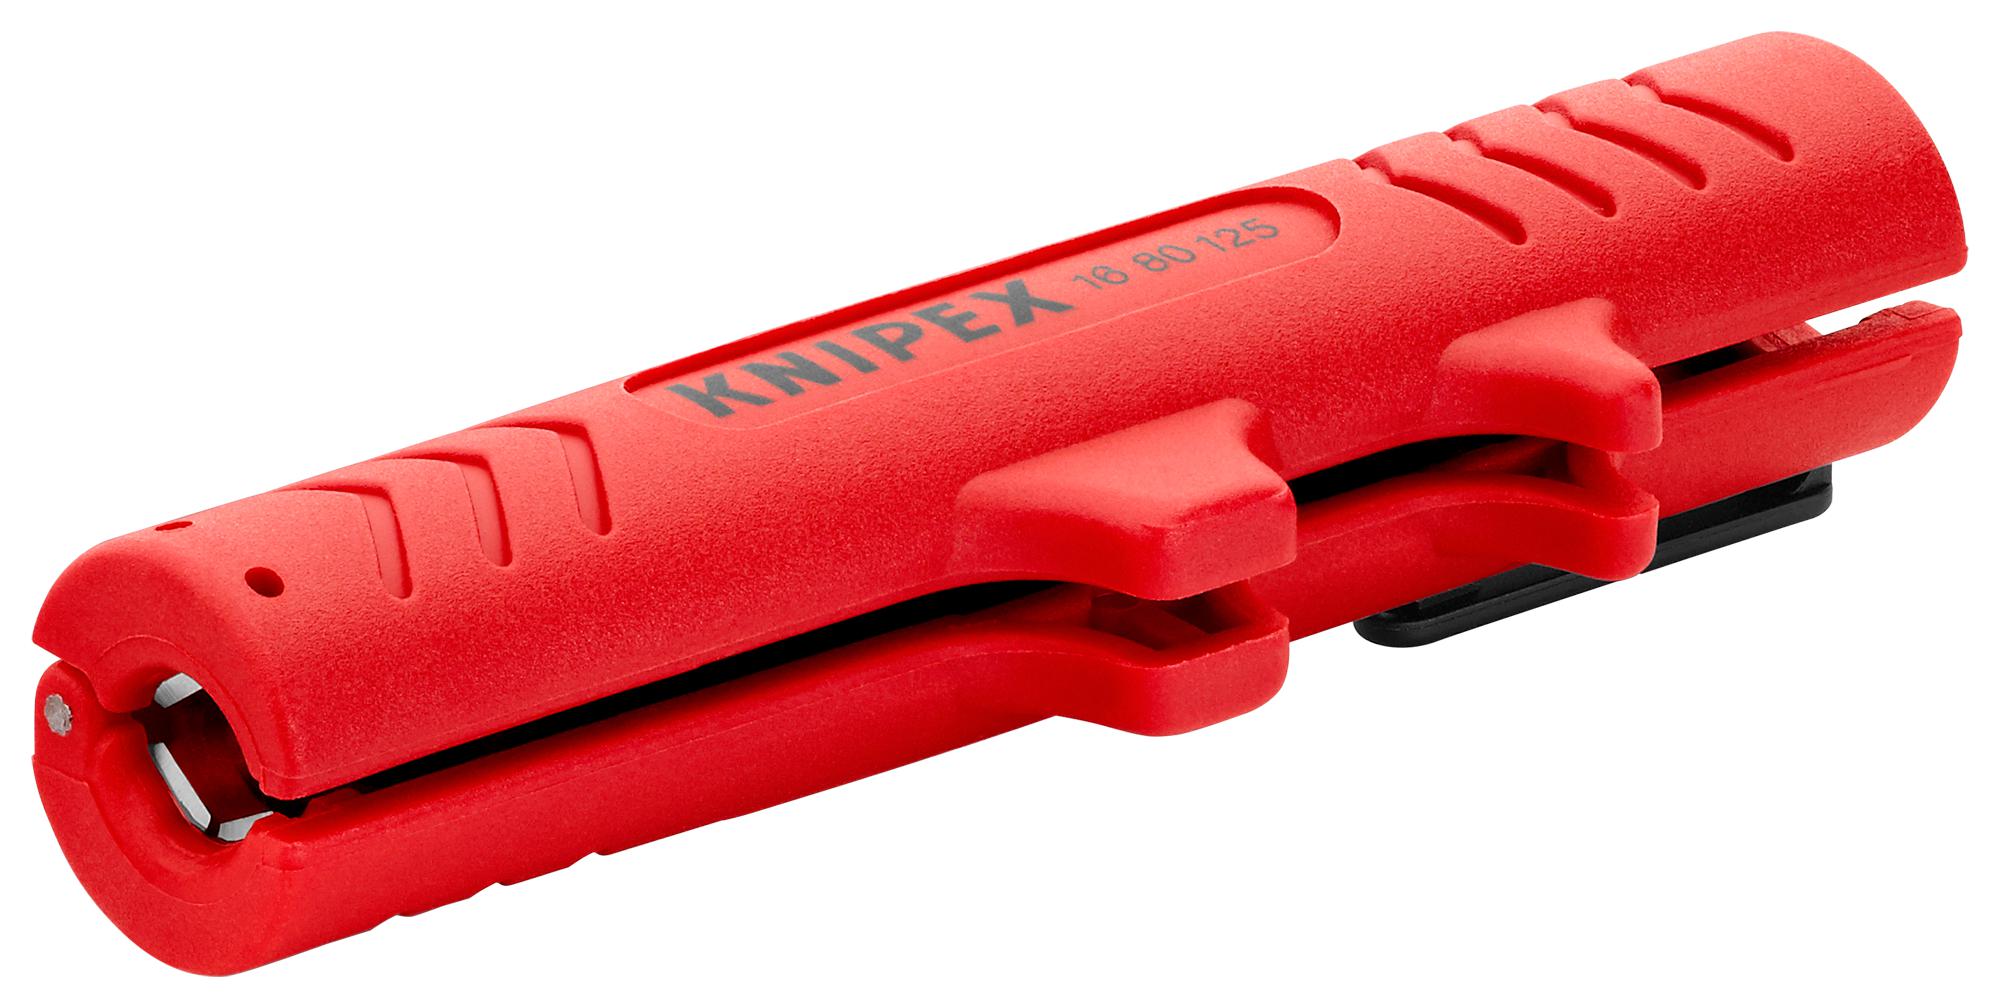 16 80 125 SB CABLE STRIPPER, UNIVERSAL KNIPEX